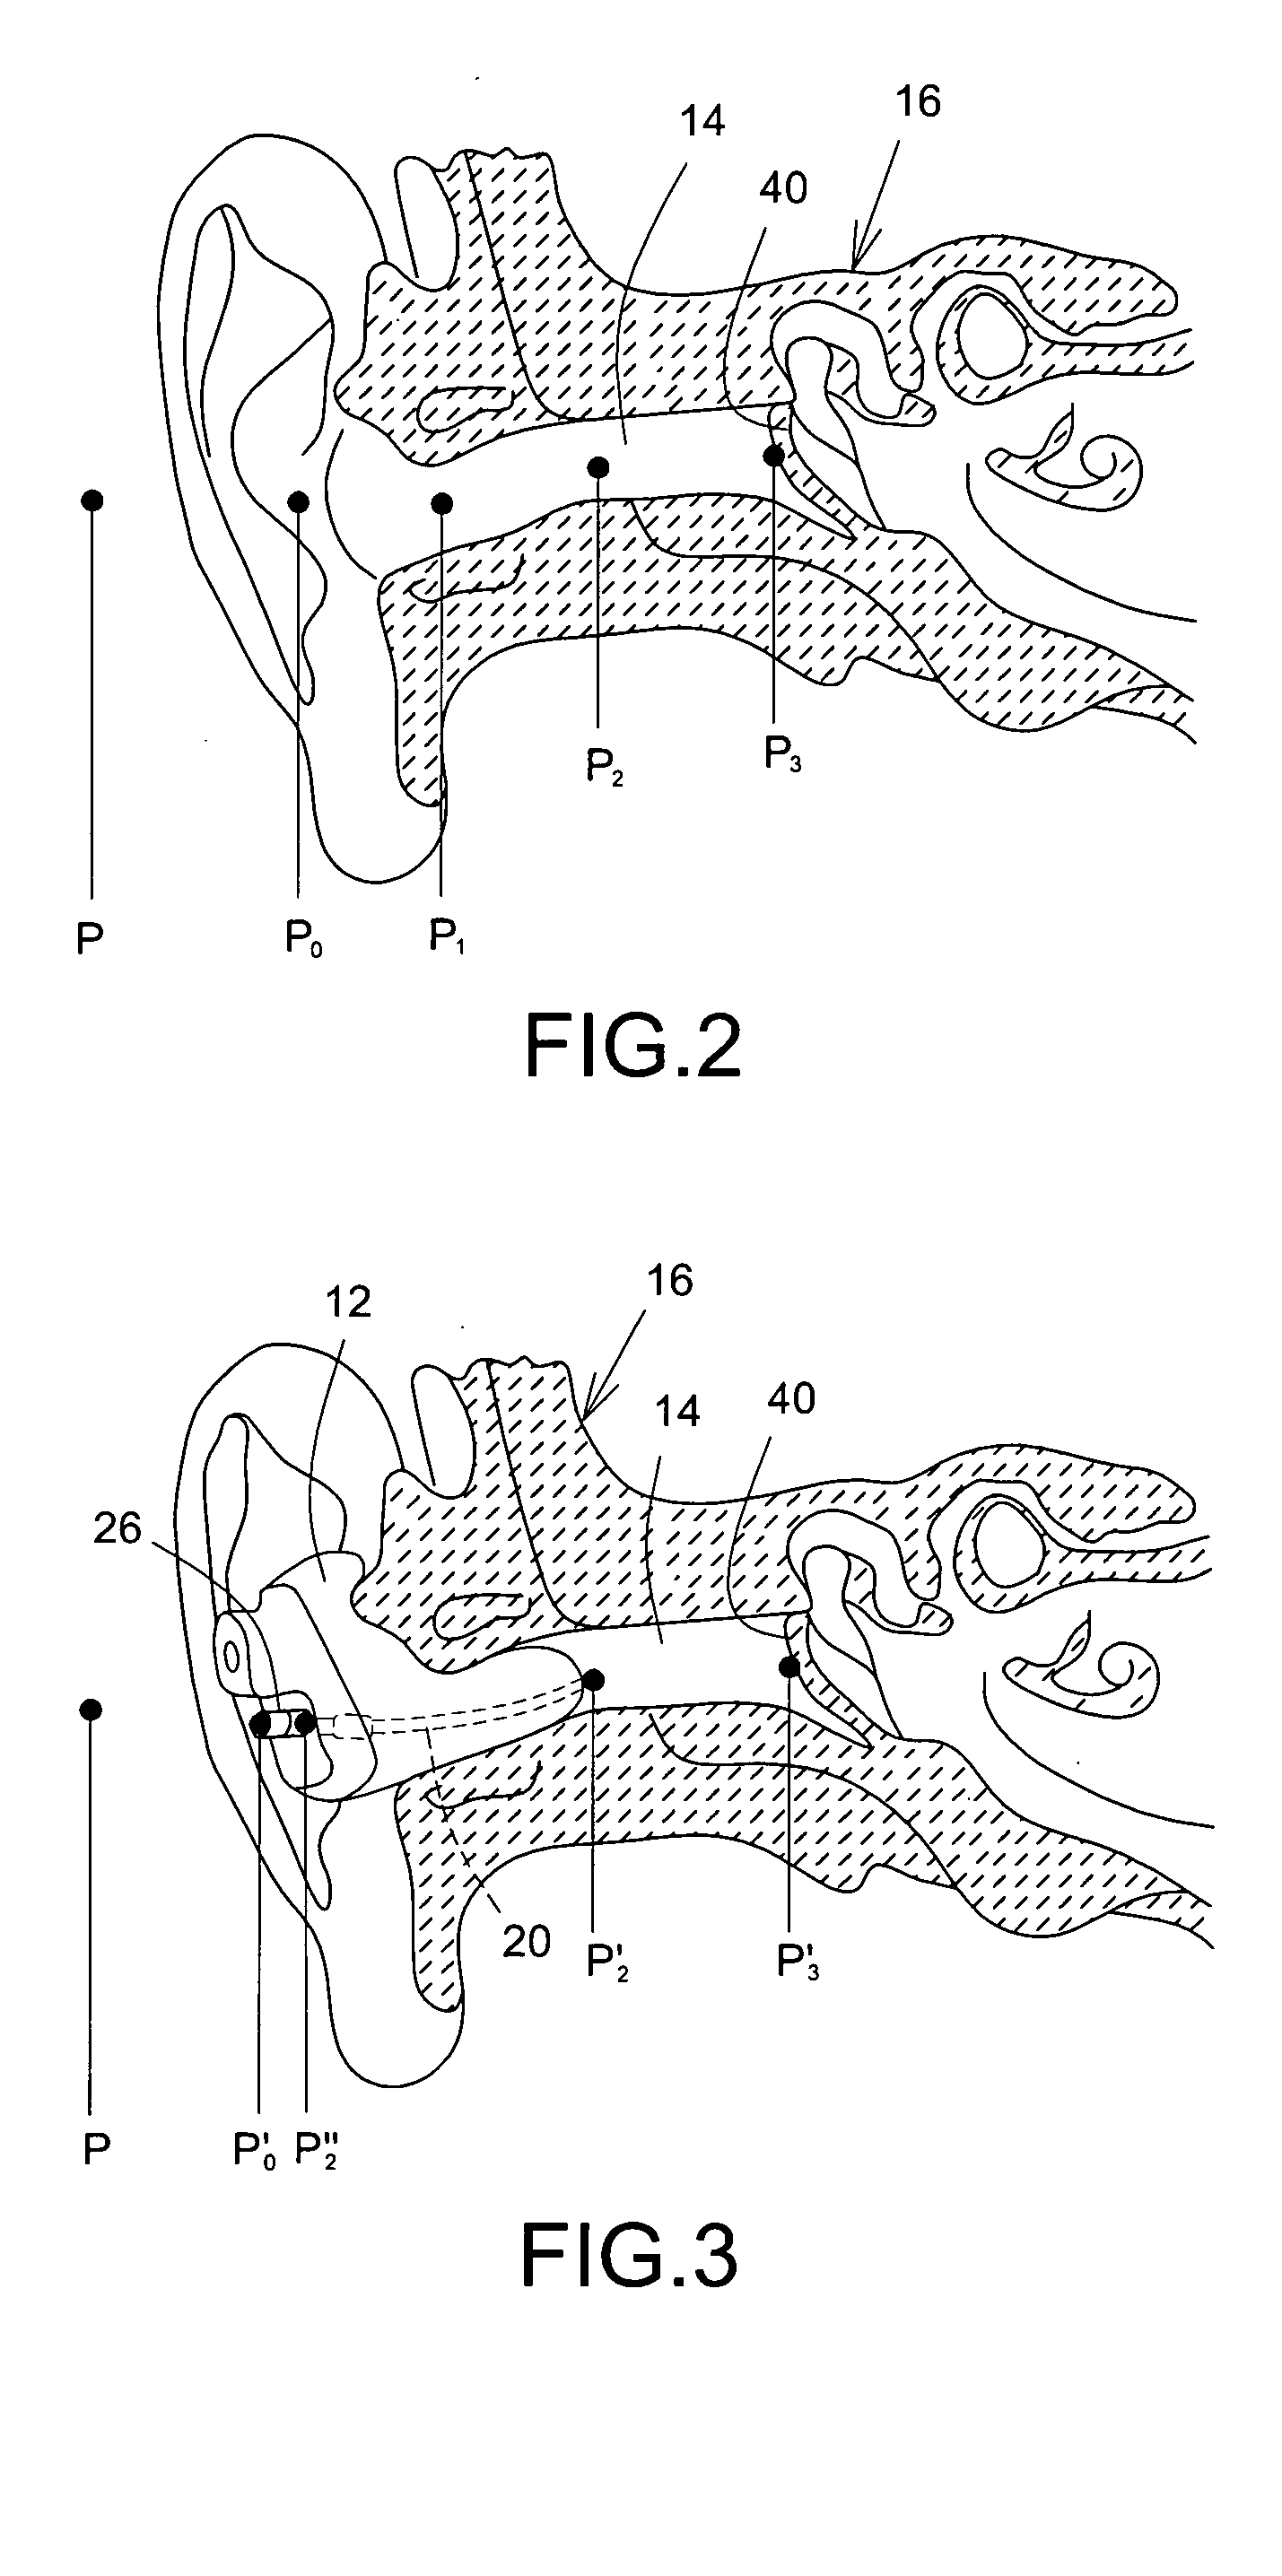 Method and apparatus for objective assessment of in-ear device acoustical performance